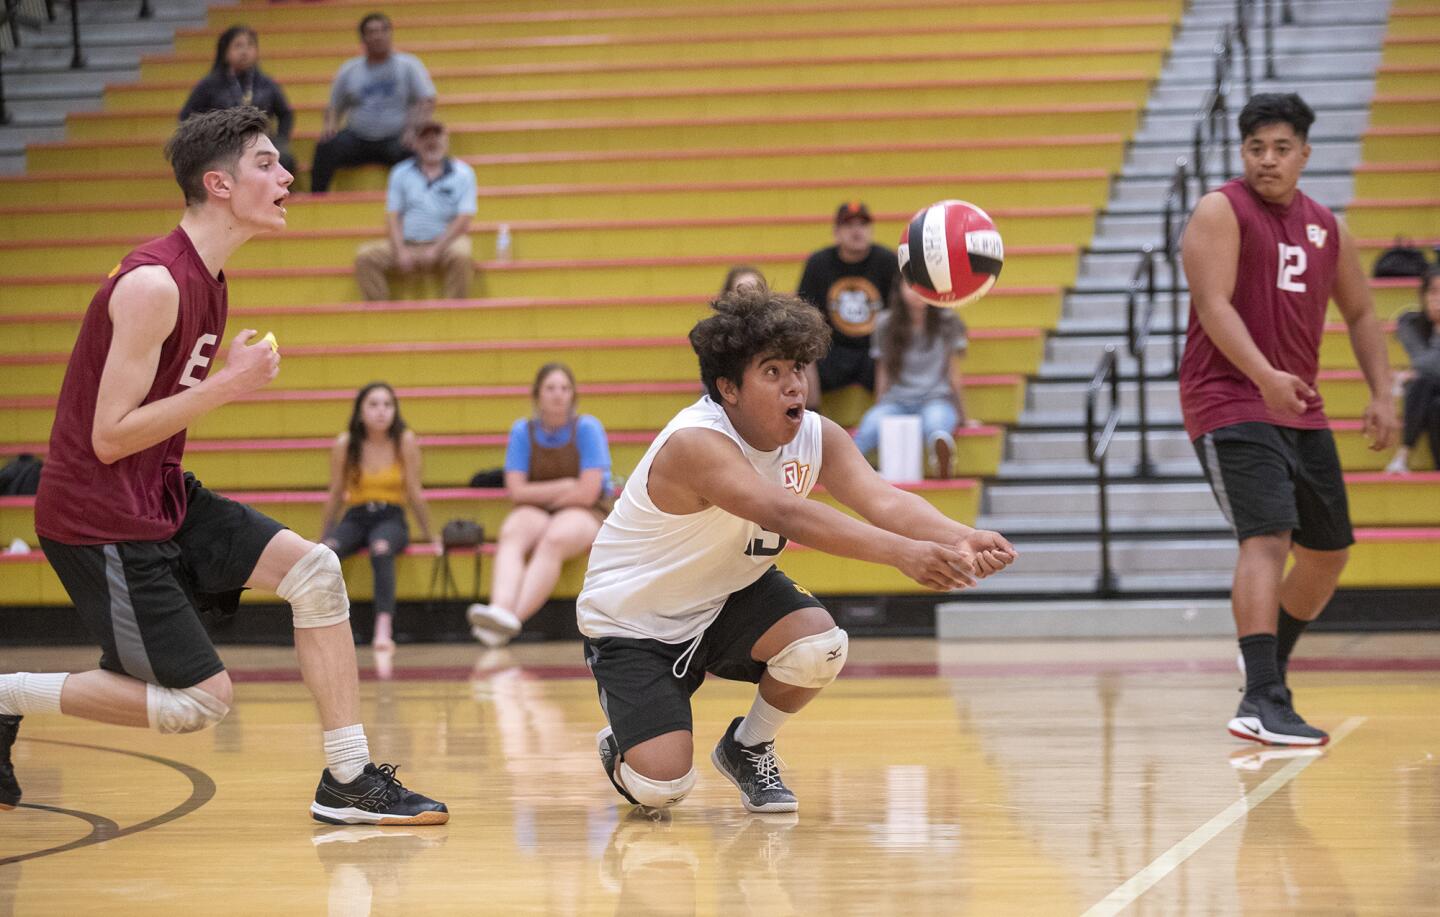 Ocean View's Aimar Herrera digs a ball during a Golden West League match at Segerstrom on Tuesday.